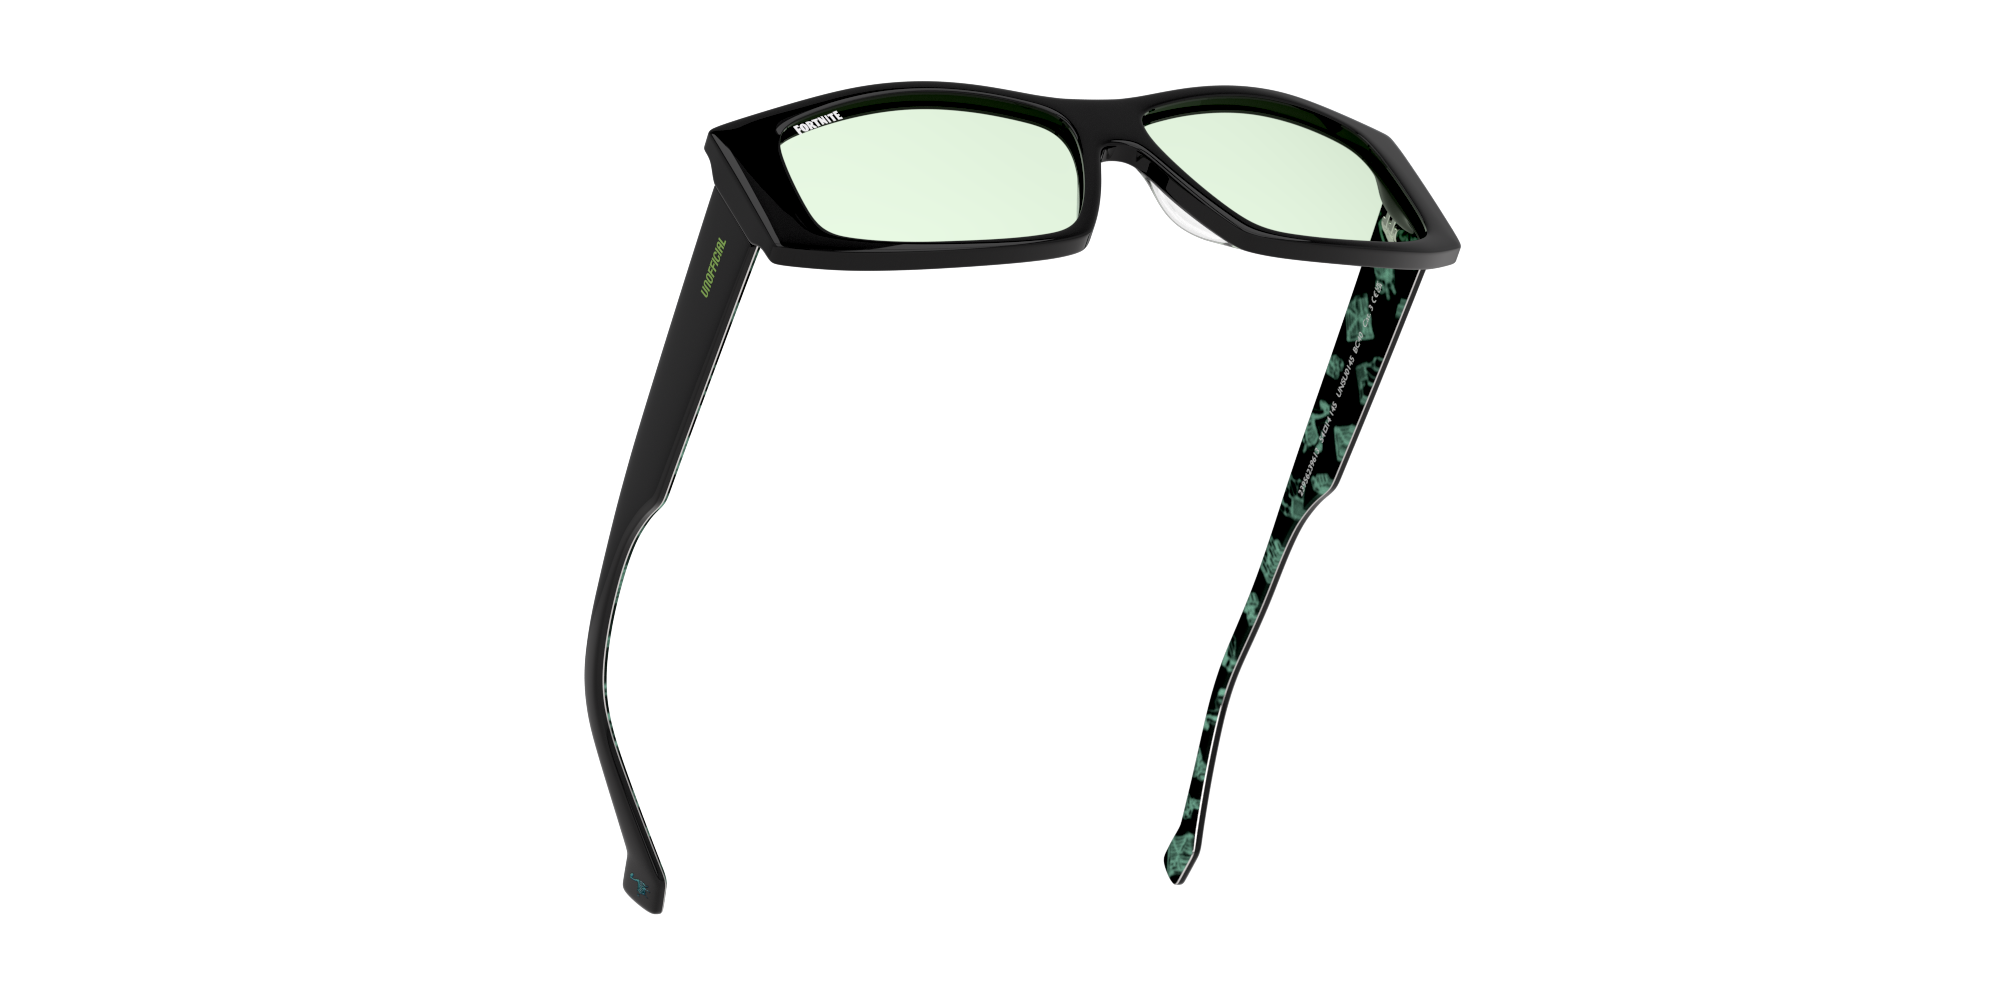 Bottom_Up Fortnite with Unofficial UNSU0145 Sunglasses Green / Black